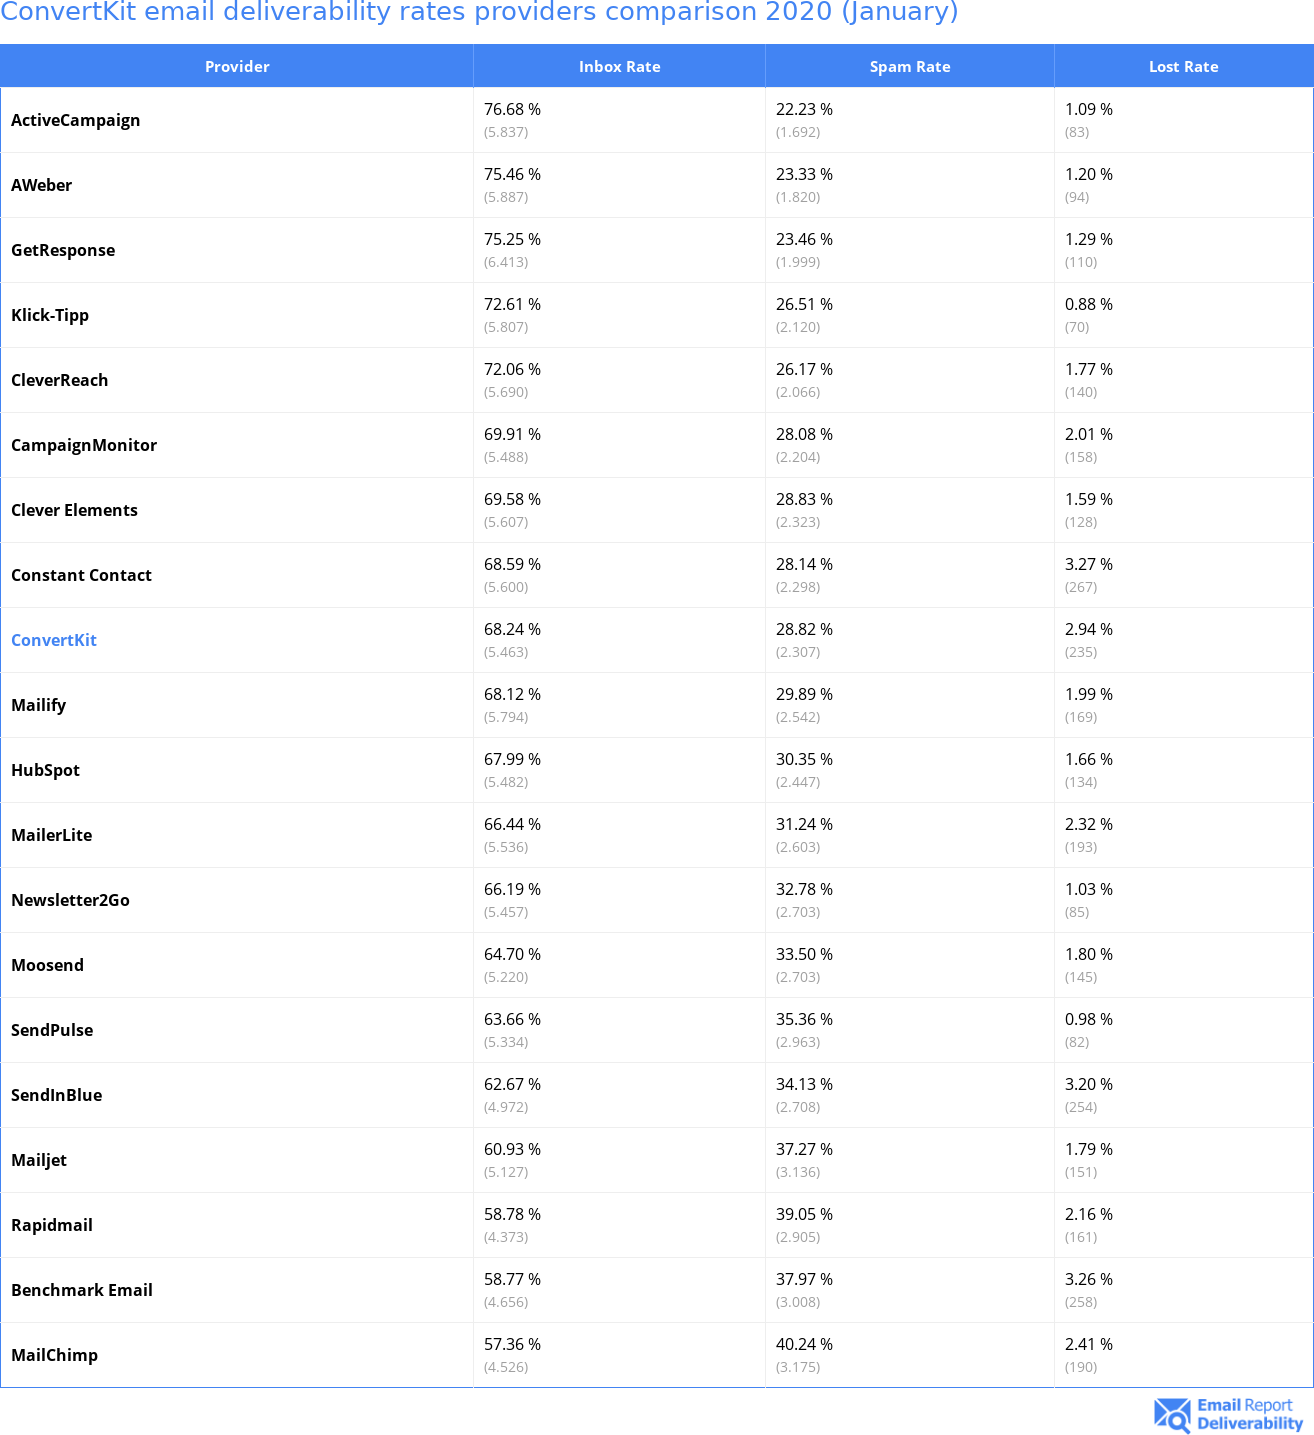 ConvertKit email deliverability rates providers comparison 2020 (January)